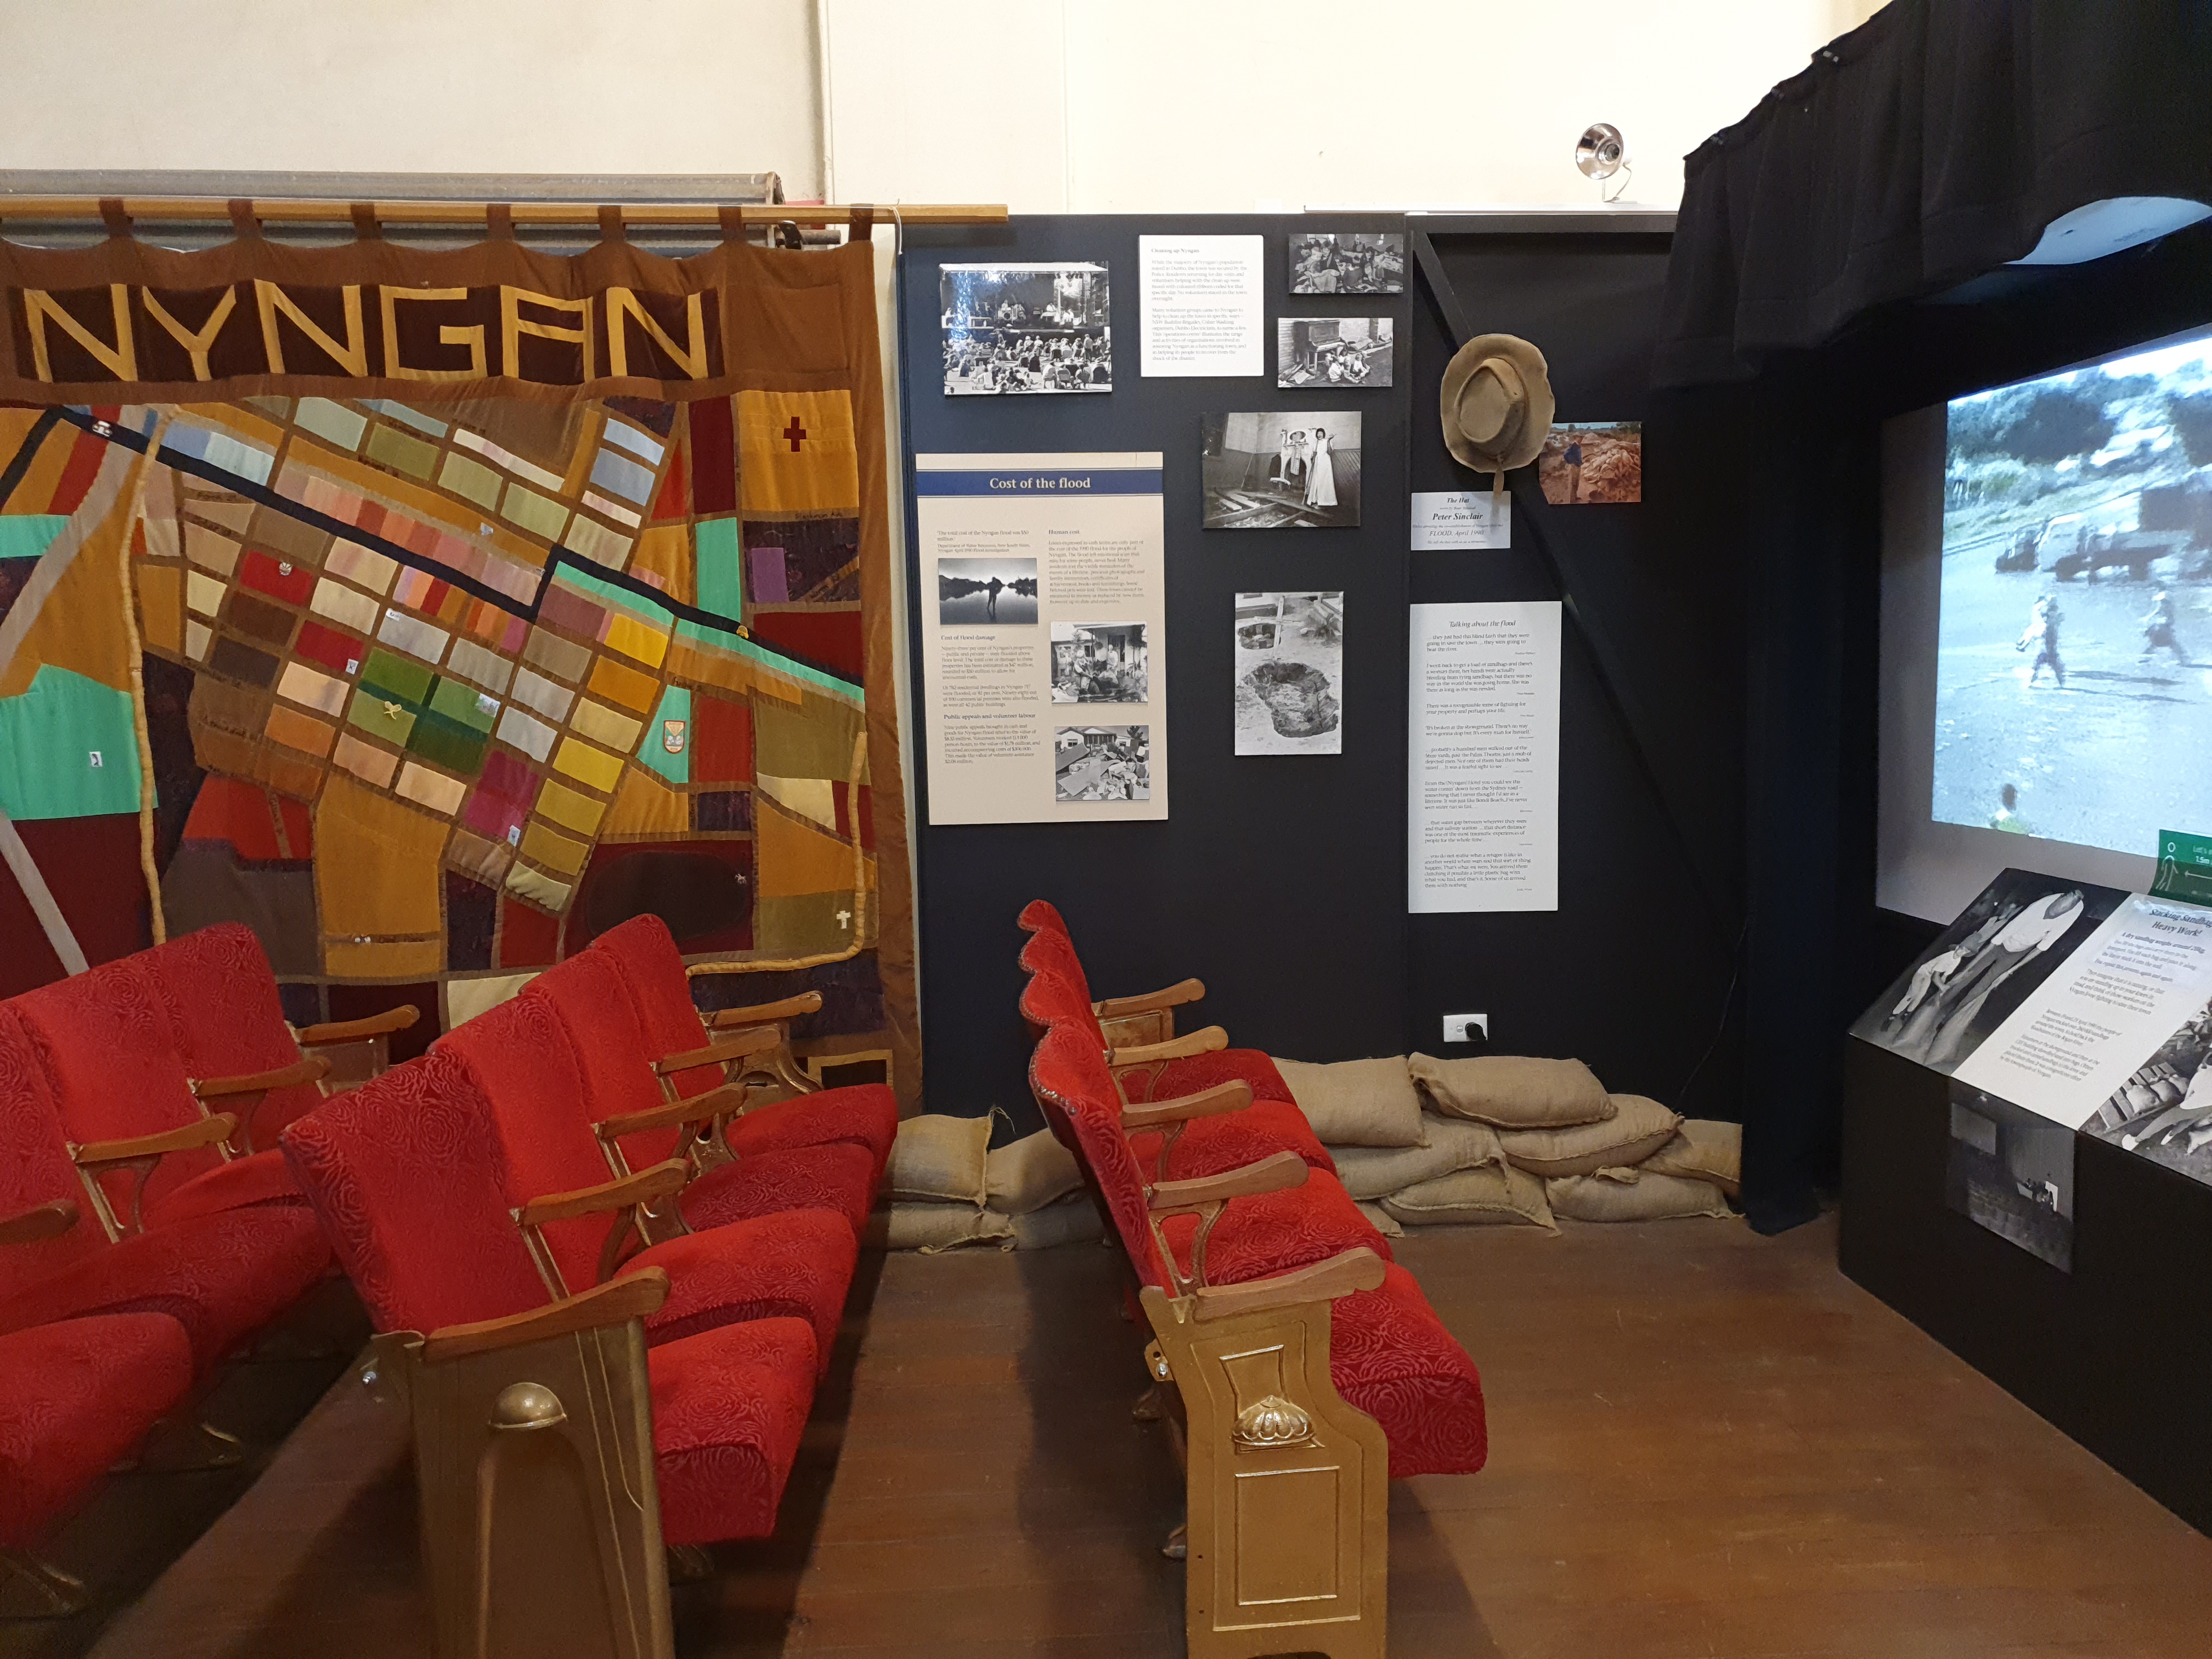 Nyngan Museum Palais Theatrette and Flood Display